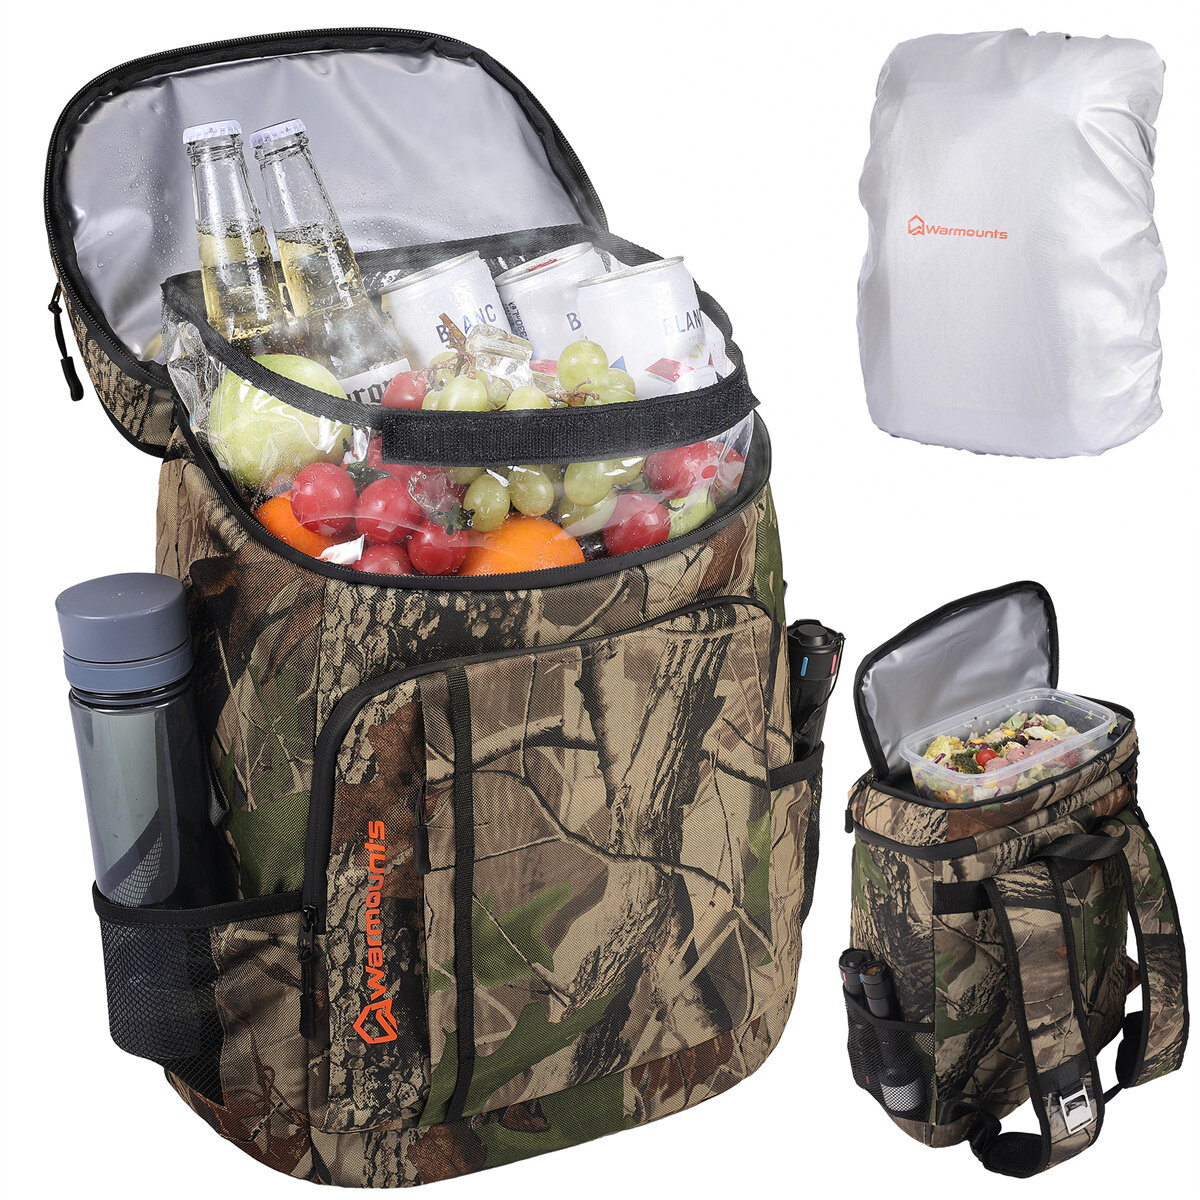 WARMOUNTS Backpack Cooler Insulated 36 Cans w/ Insulating Cover, Upgraded Leakproof Soft Cooler Backpack 2 Compartment f